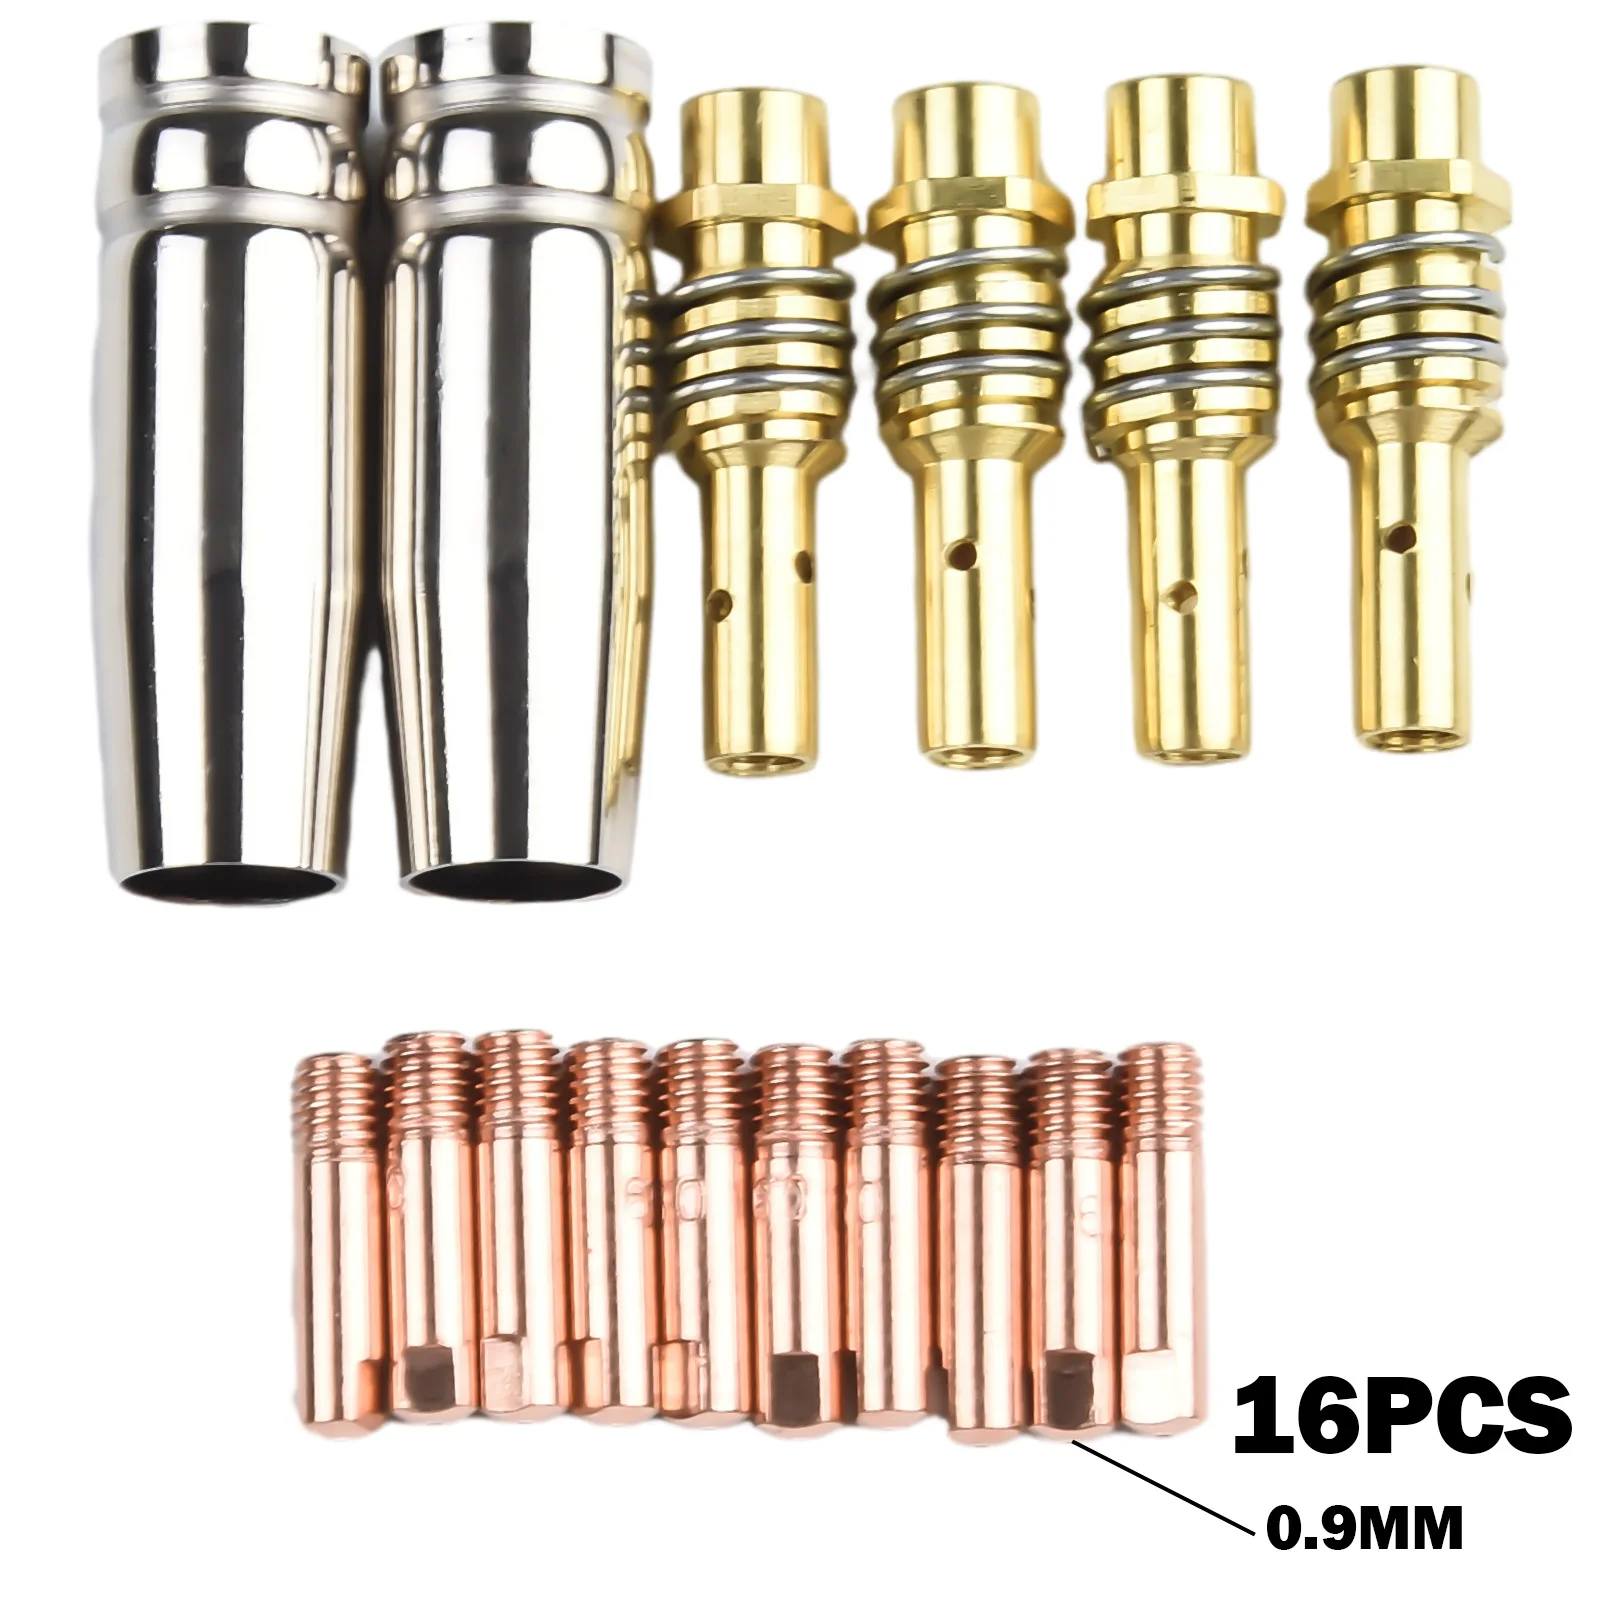 Mig Contact Tip Consumables 16PC MIG Welding MB15 15AK Contact Tip 0.8/1.0/1.2mm Conductive Tips Protective Nozzles Tip Holder 15ak welding torch consumables euro style contact tips 0 8mm 1 0mm 1 2mm gas ceramic nozzle tip holder accessories mig mag